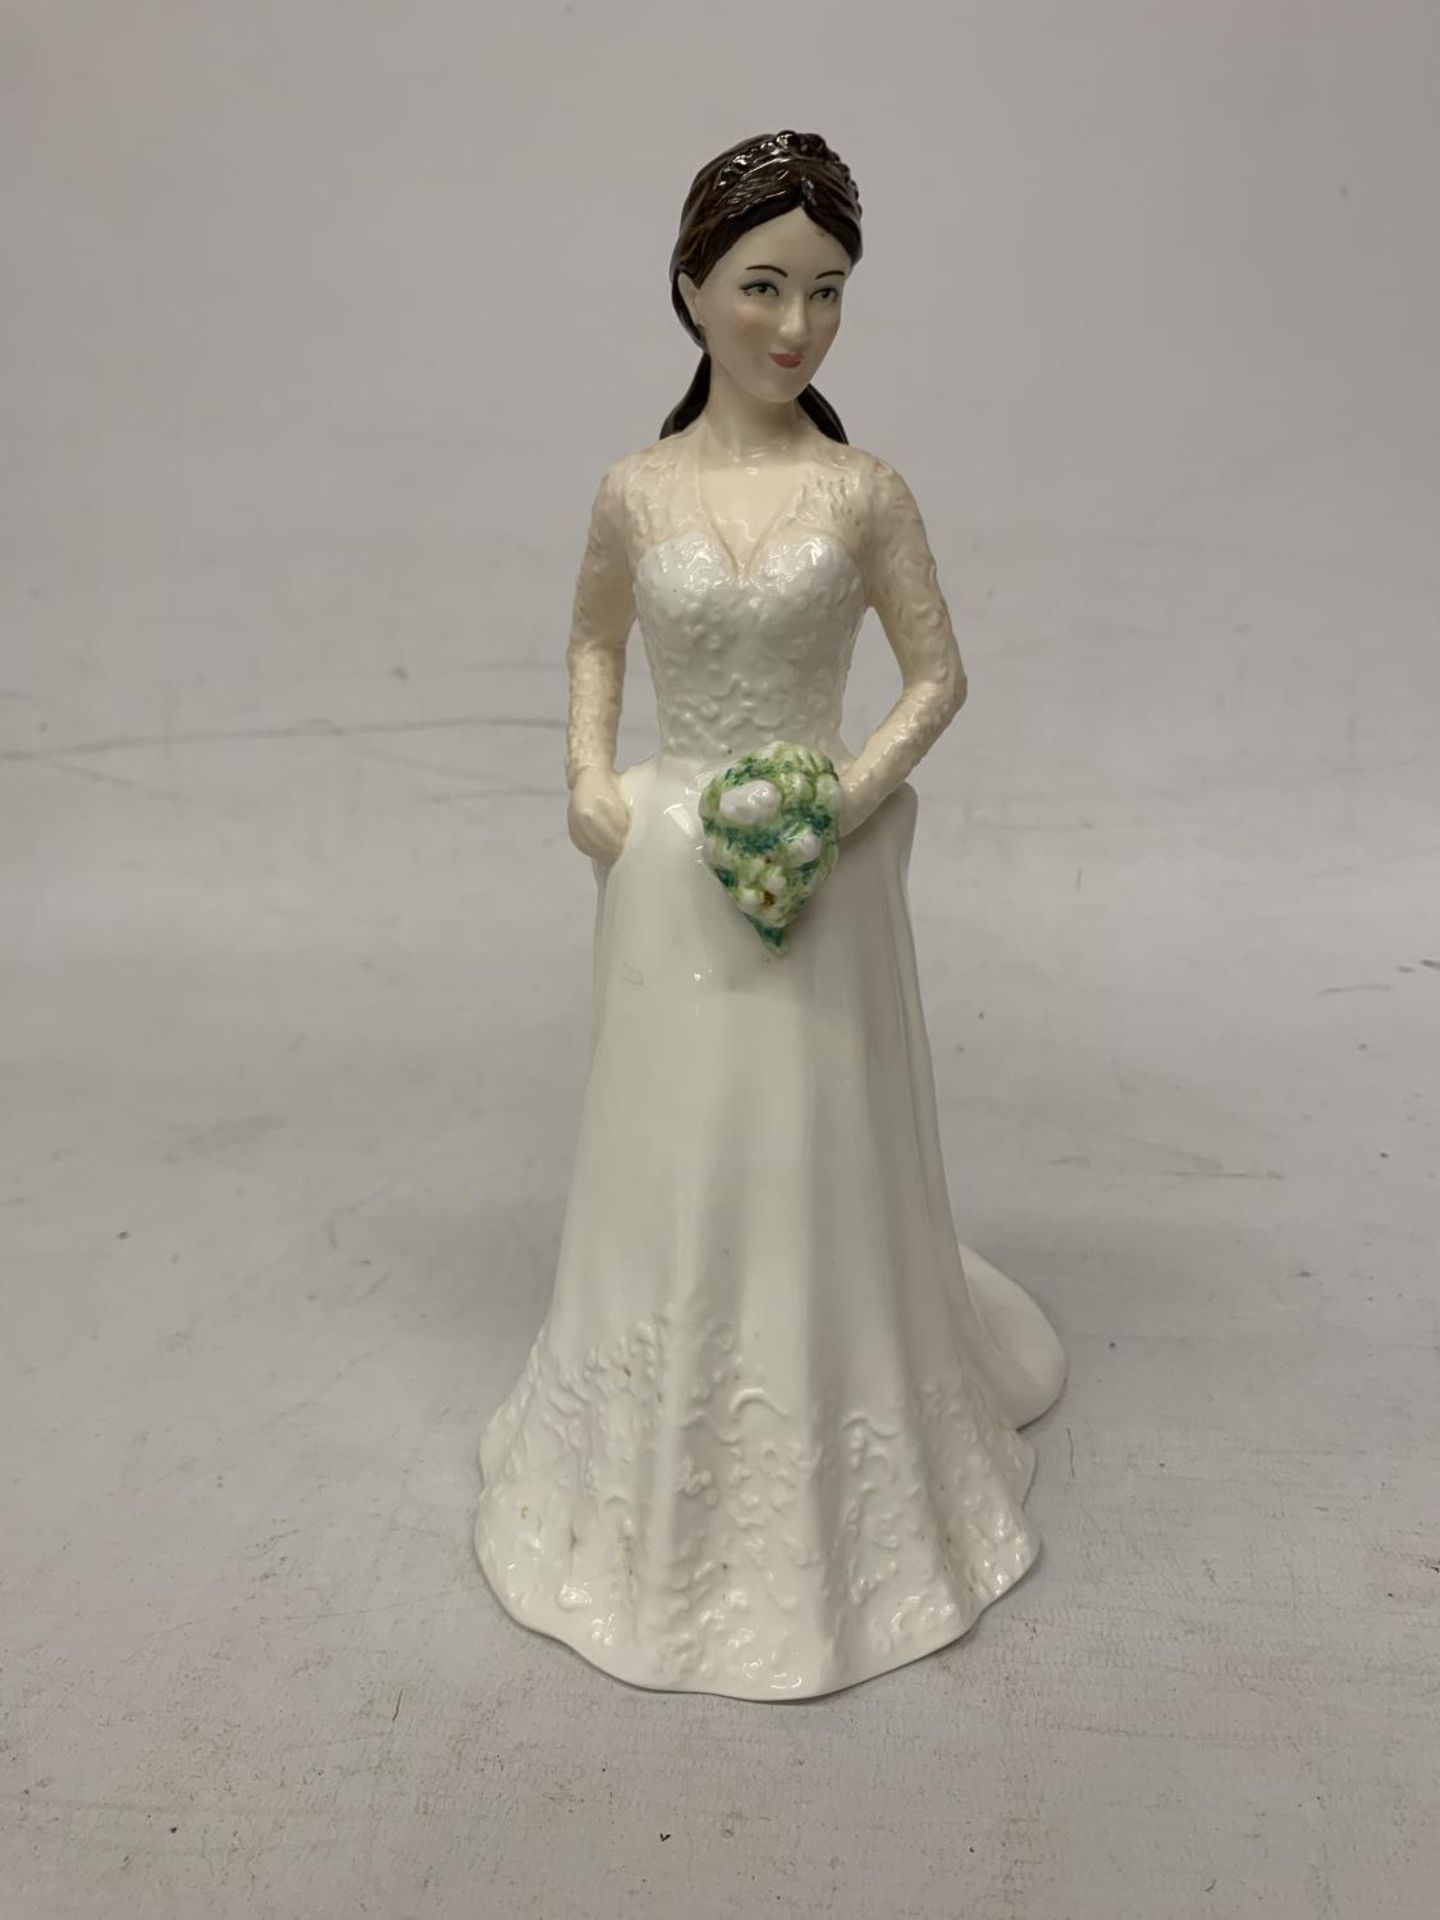 A ROYAL WORCESTER FIGURE "CATHERINE DUCHESS OF CAMBRIDGE" LIMITED EDITION OF 2995